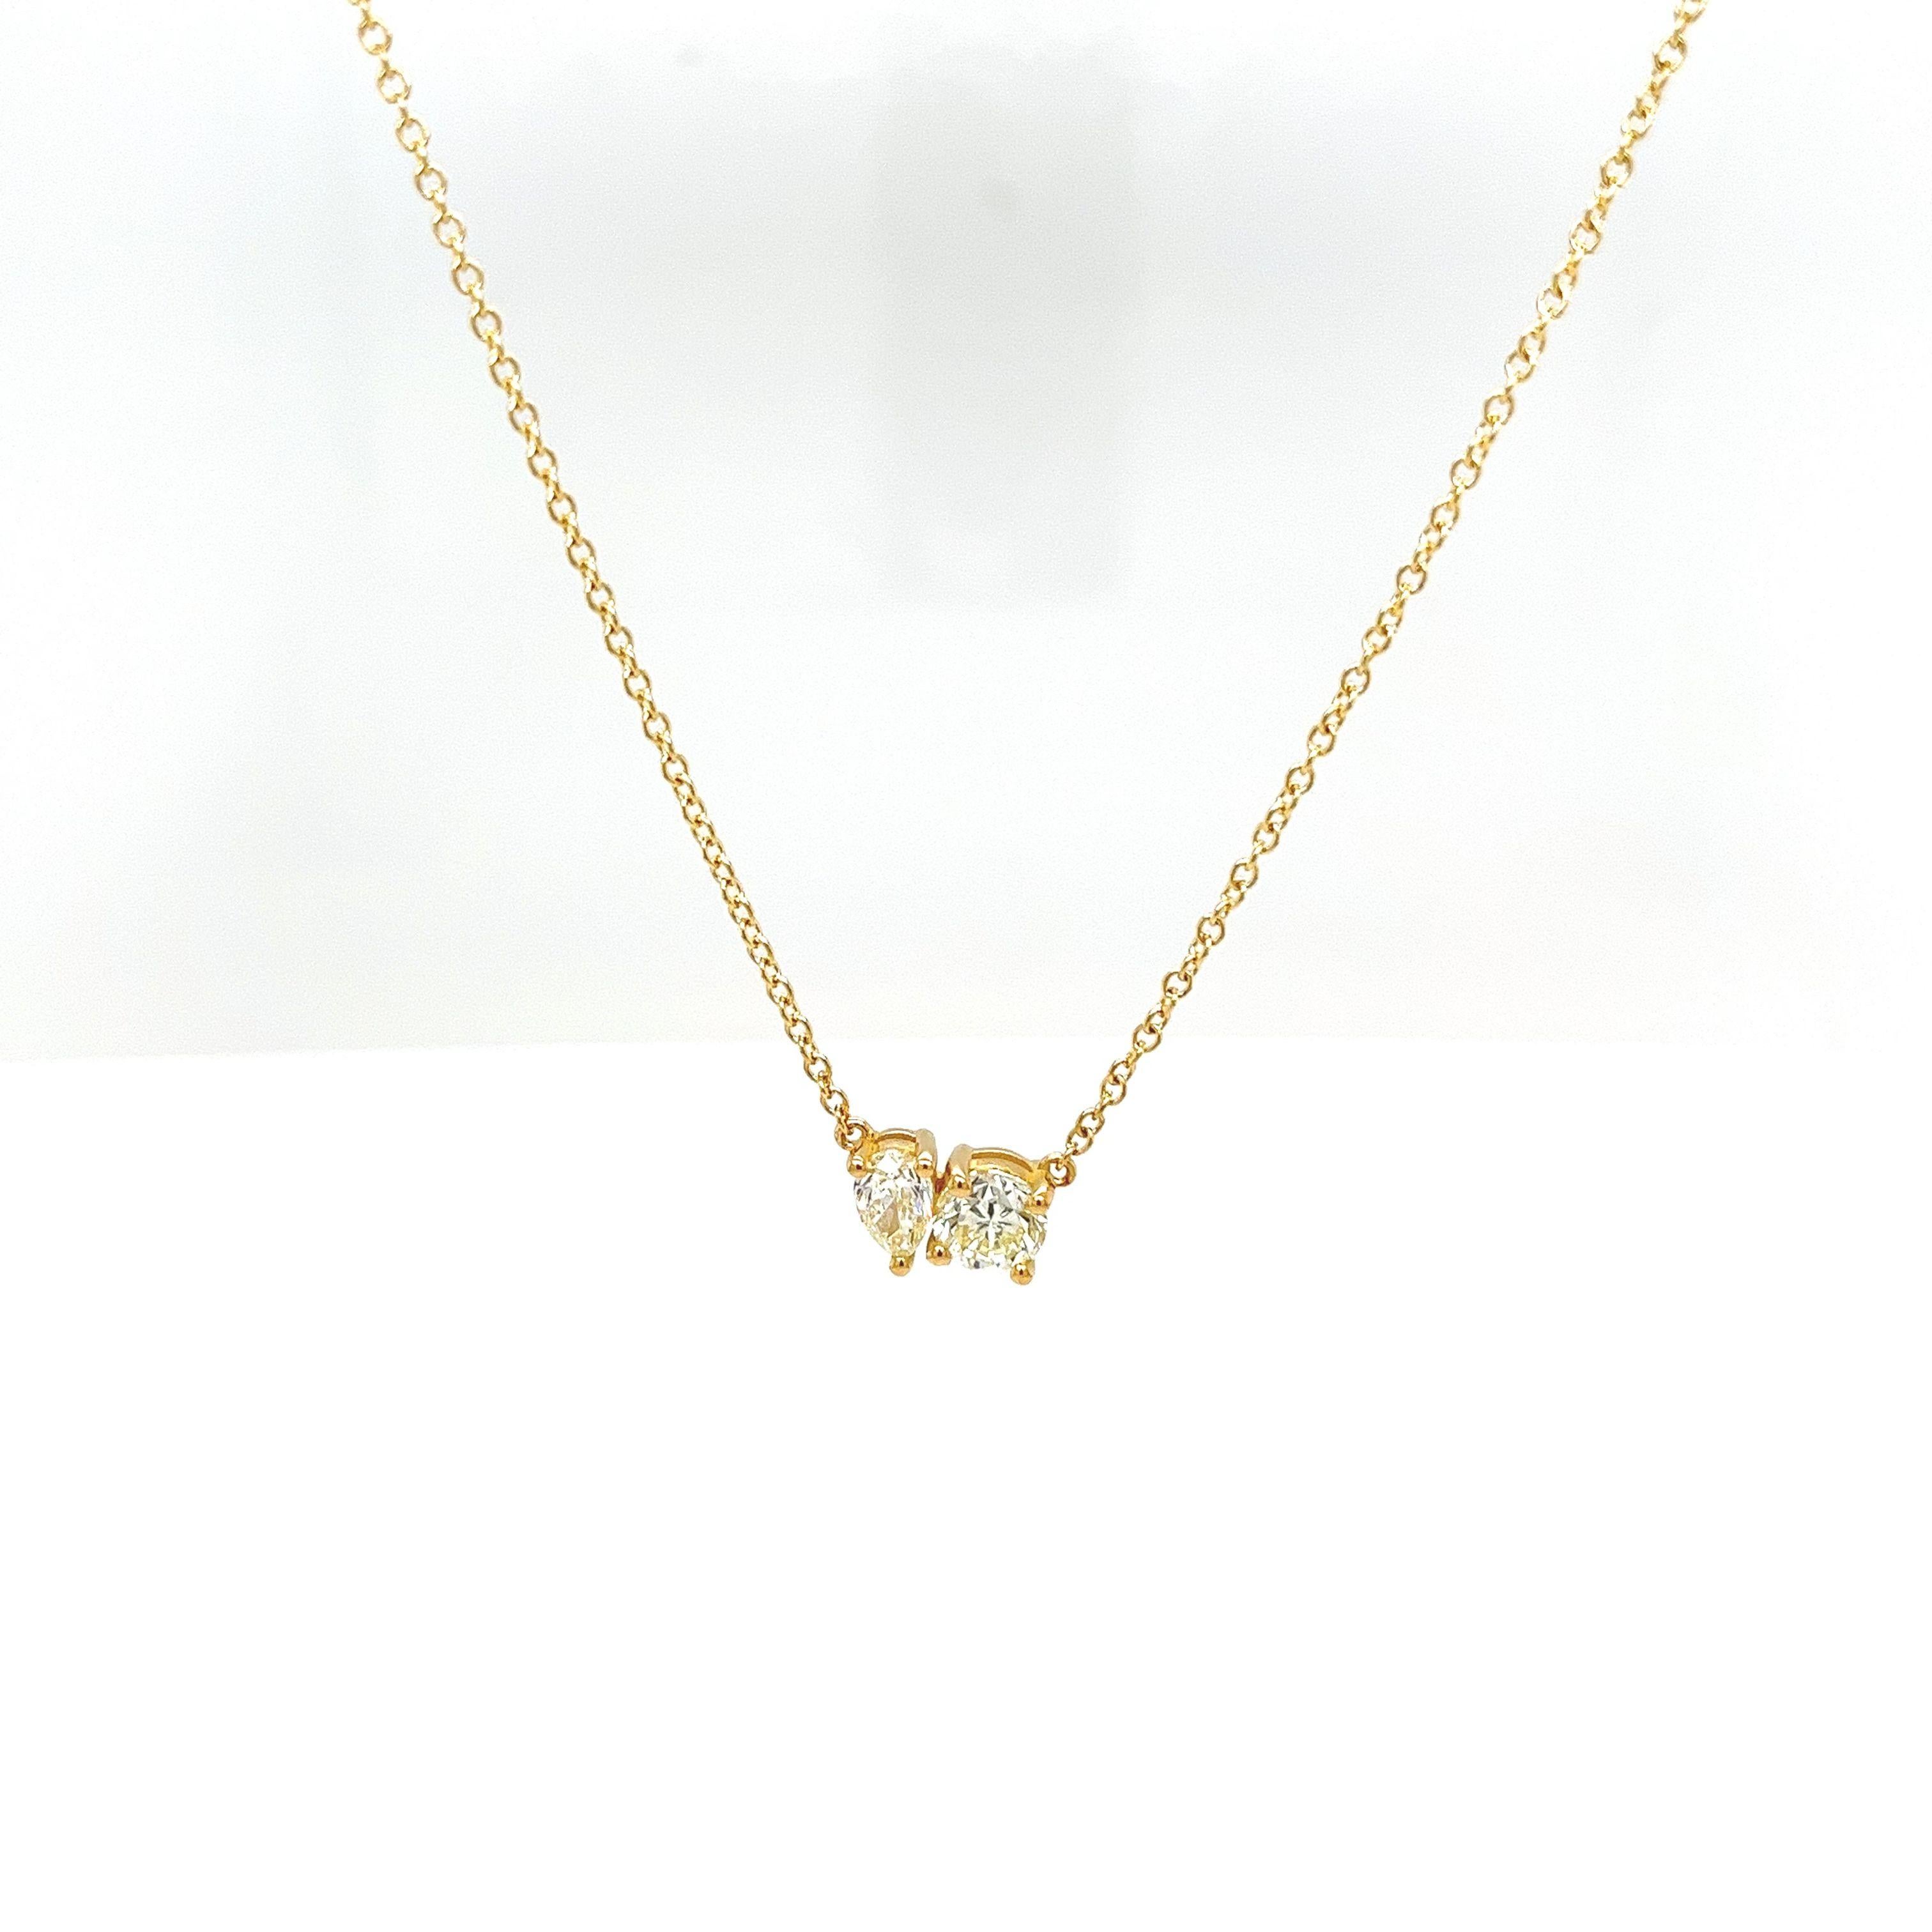 This gorgeous Toi Et Moi pendant is set with 0.30ct diamond pear shape and 0.50ct round brilliant cut diamond M-N colour and VSclarity in 18ct yellow gold. 
The pendant is suspended from a 18ct yellow gold chain that measures 18 inches adjustable at